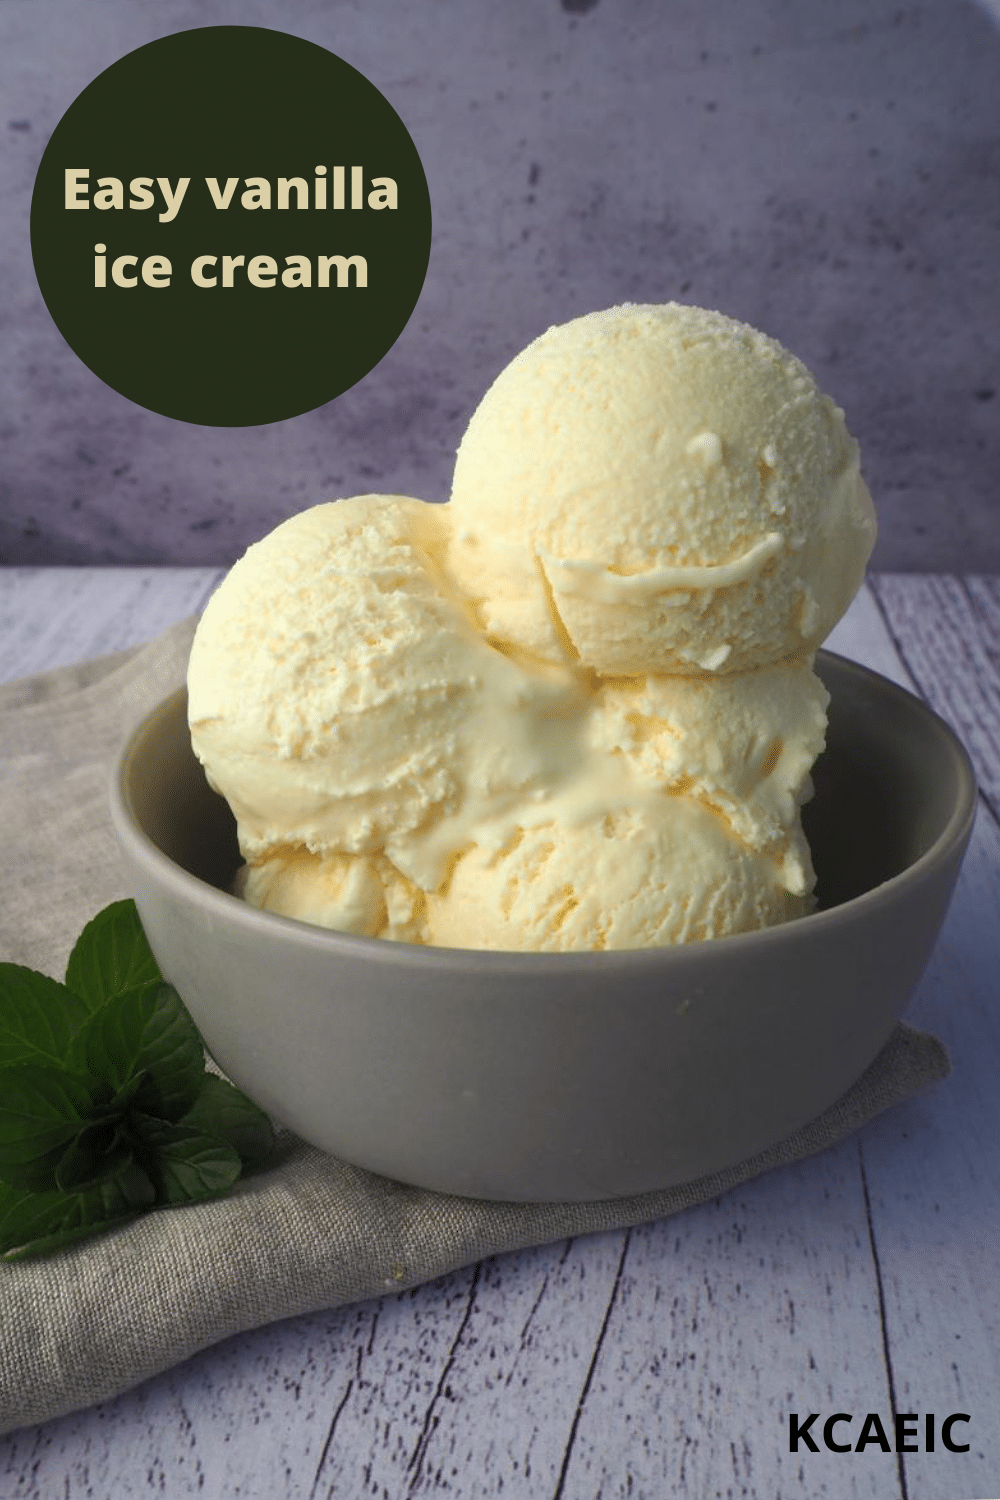 Scoops of vanilla ice ice cream in a grey bowl, with a vintage teaspoon, on a beige teatowl and a white wooded flood backgroud, with a sprig of mint on the side, with text overlay, Easy vanilla ice cream and KCAEIC.